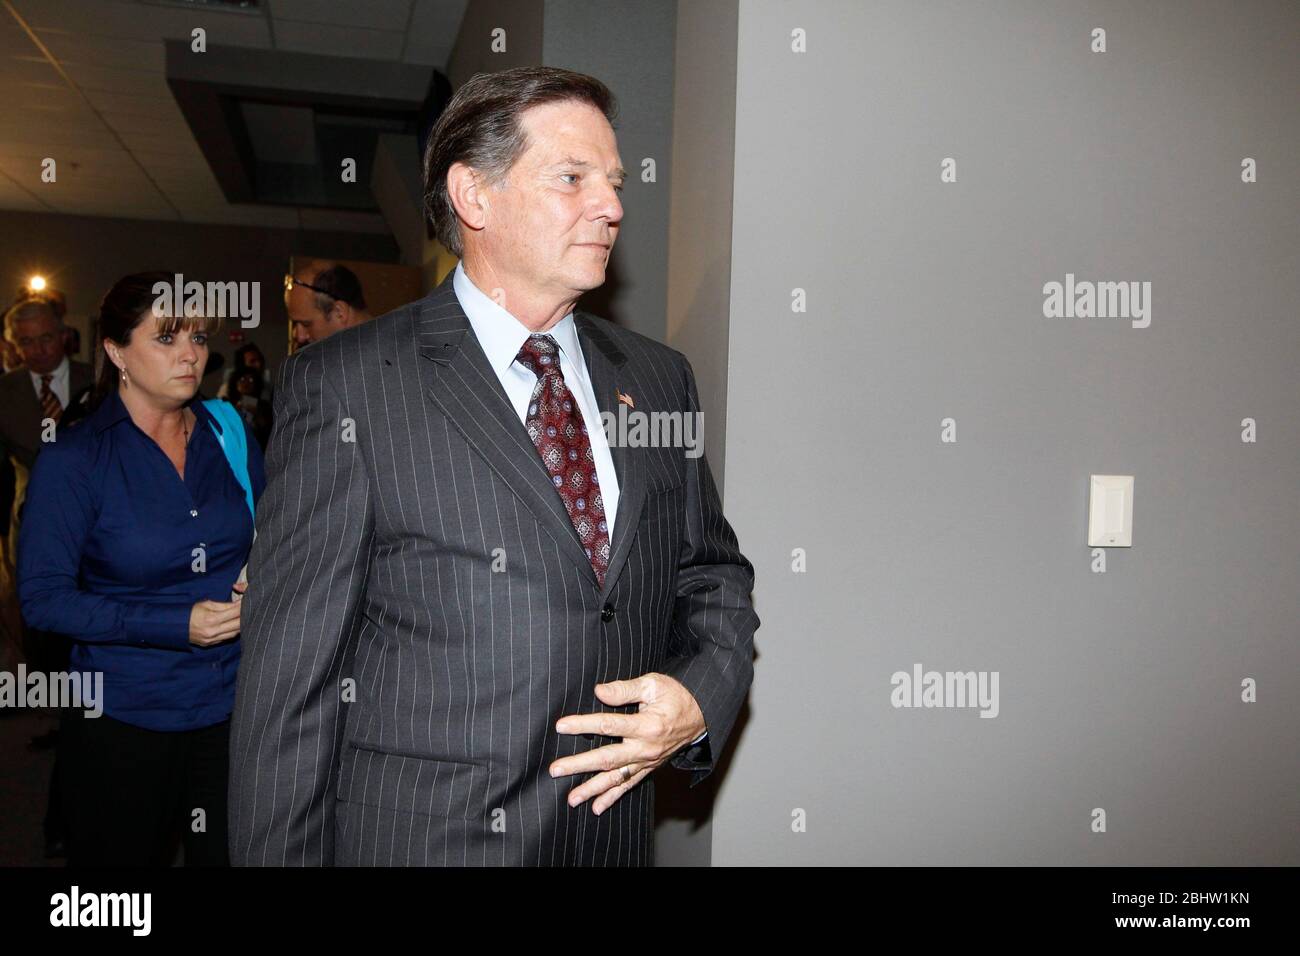 Austin Texas USA, November 24, 2010: Former U.S. Congressman and House Majority Leader Tom Delay leaves the Travis County Courthouse after a jury found him guilty of money laundering and conspiracy charges in connection with Texas campaign donations dating back to 2002. ©Bob Daemmrich Stock Photo